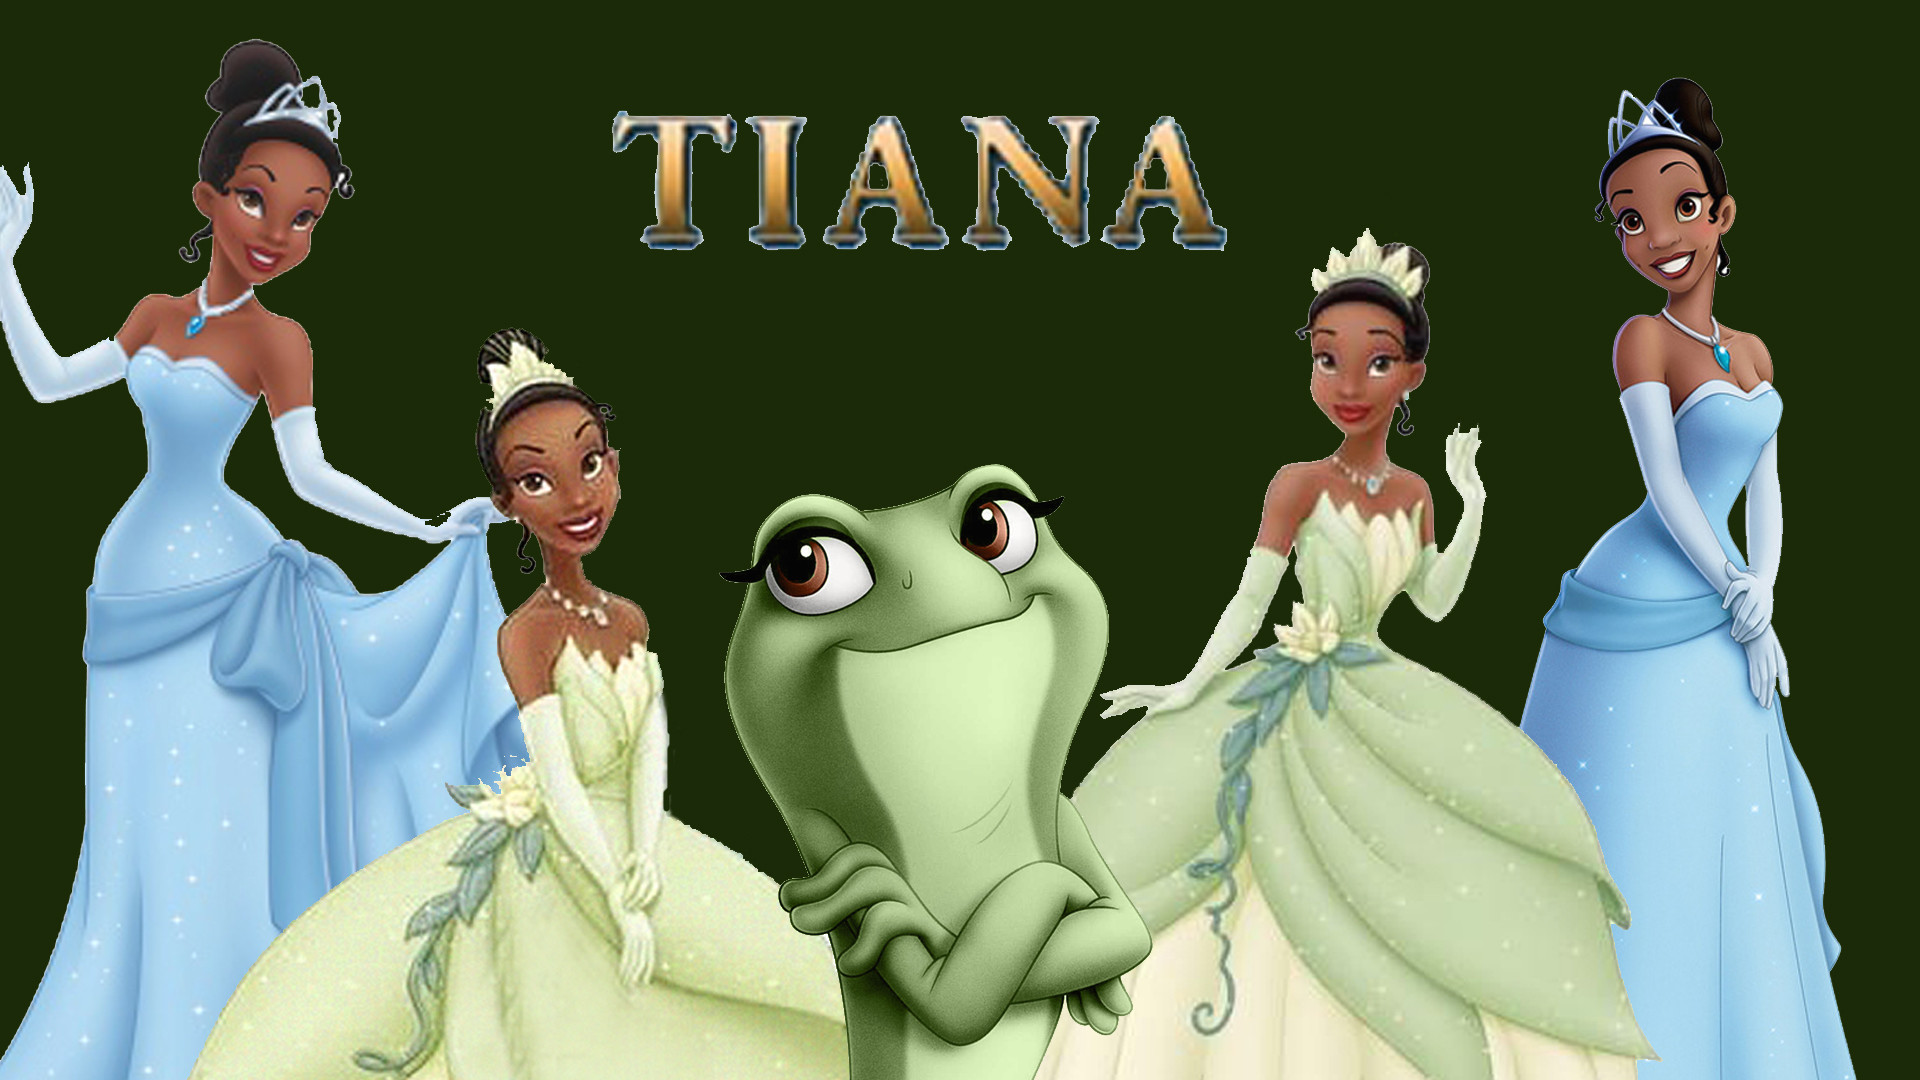 1920x1080 The Princess and the Frog High Quality Wallpaper